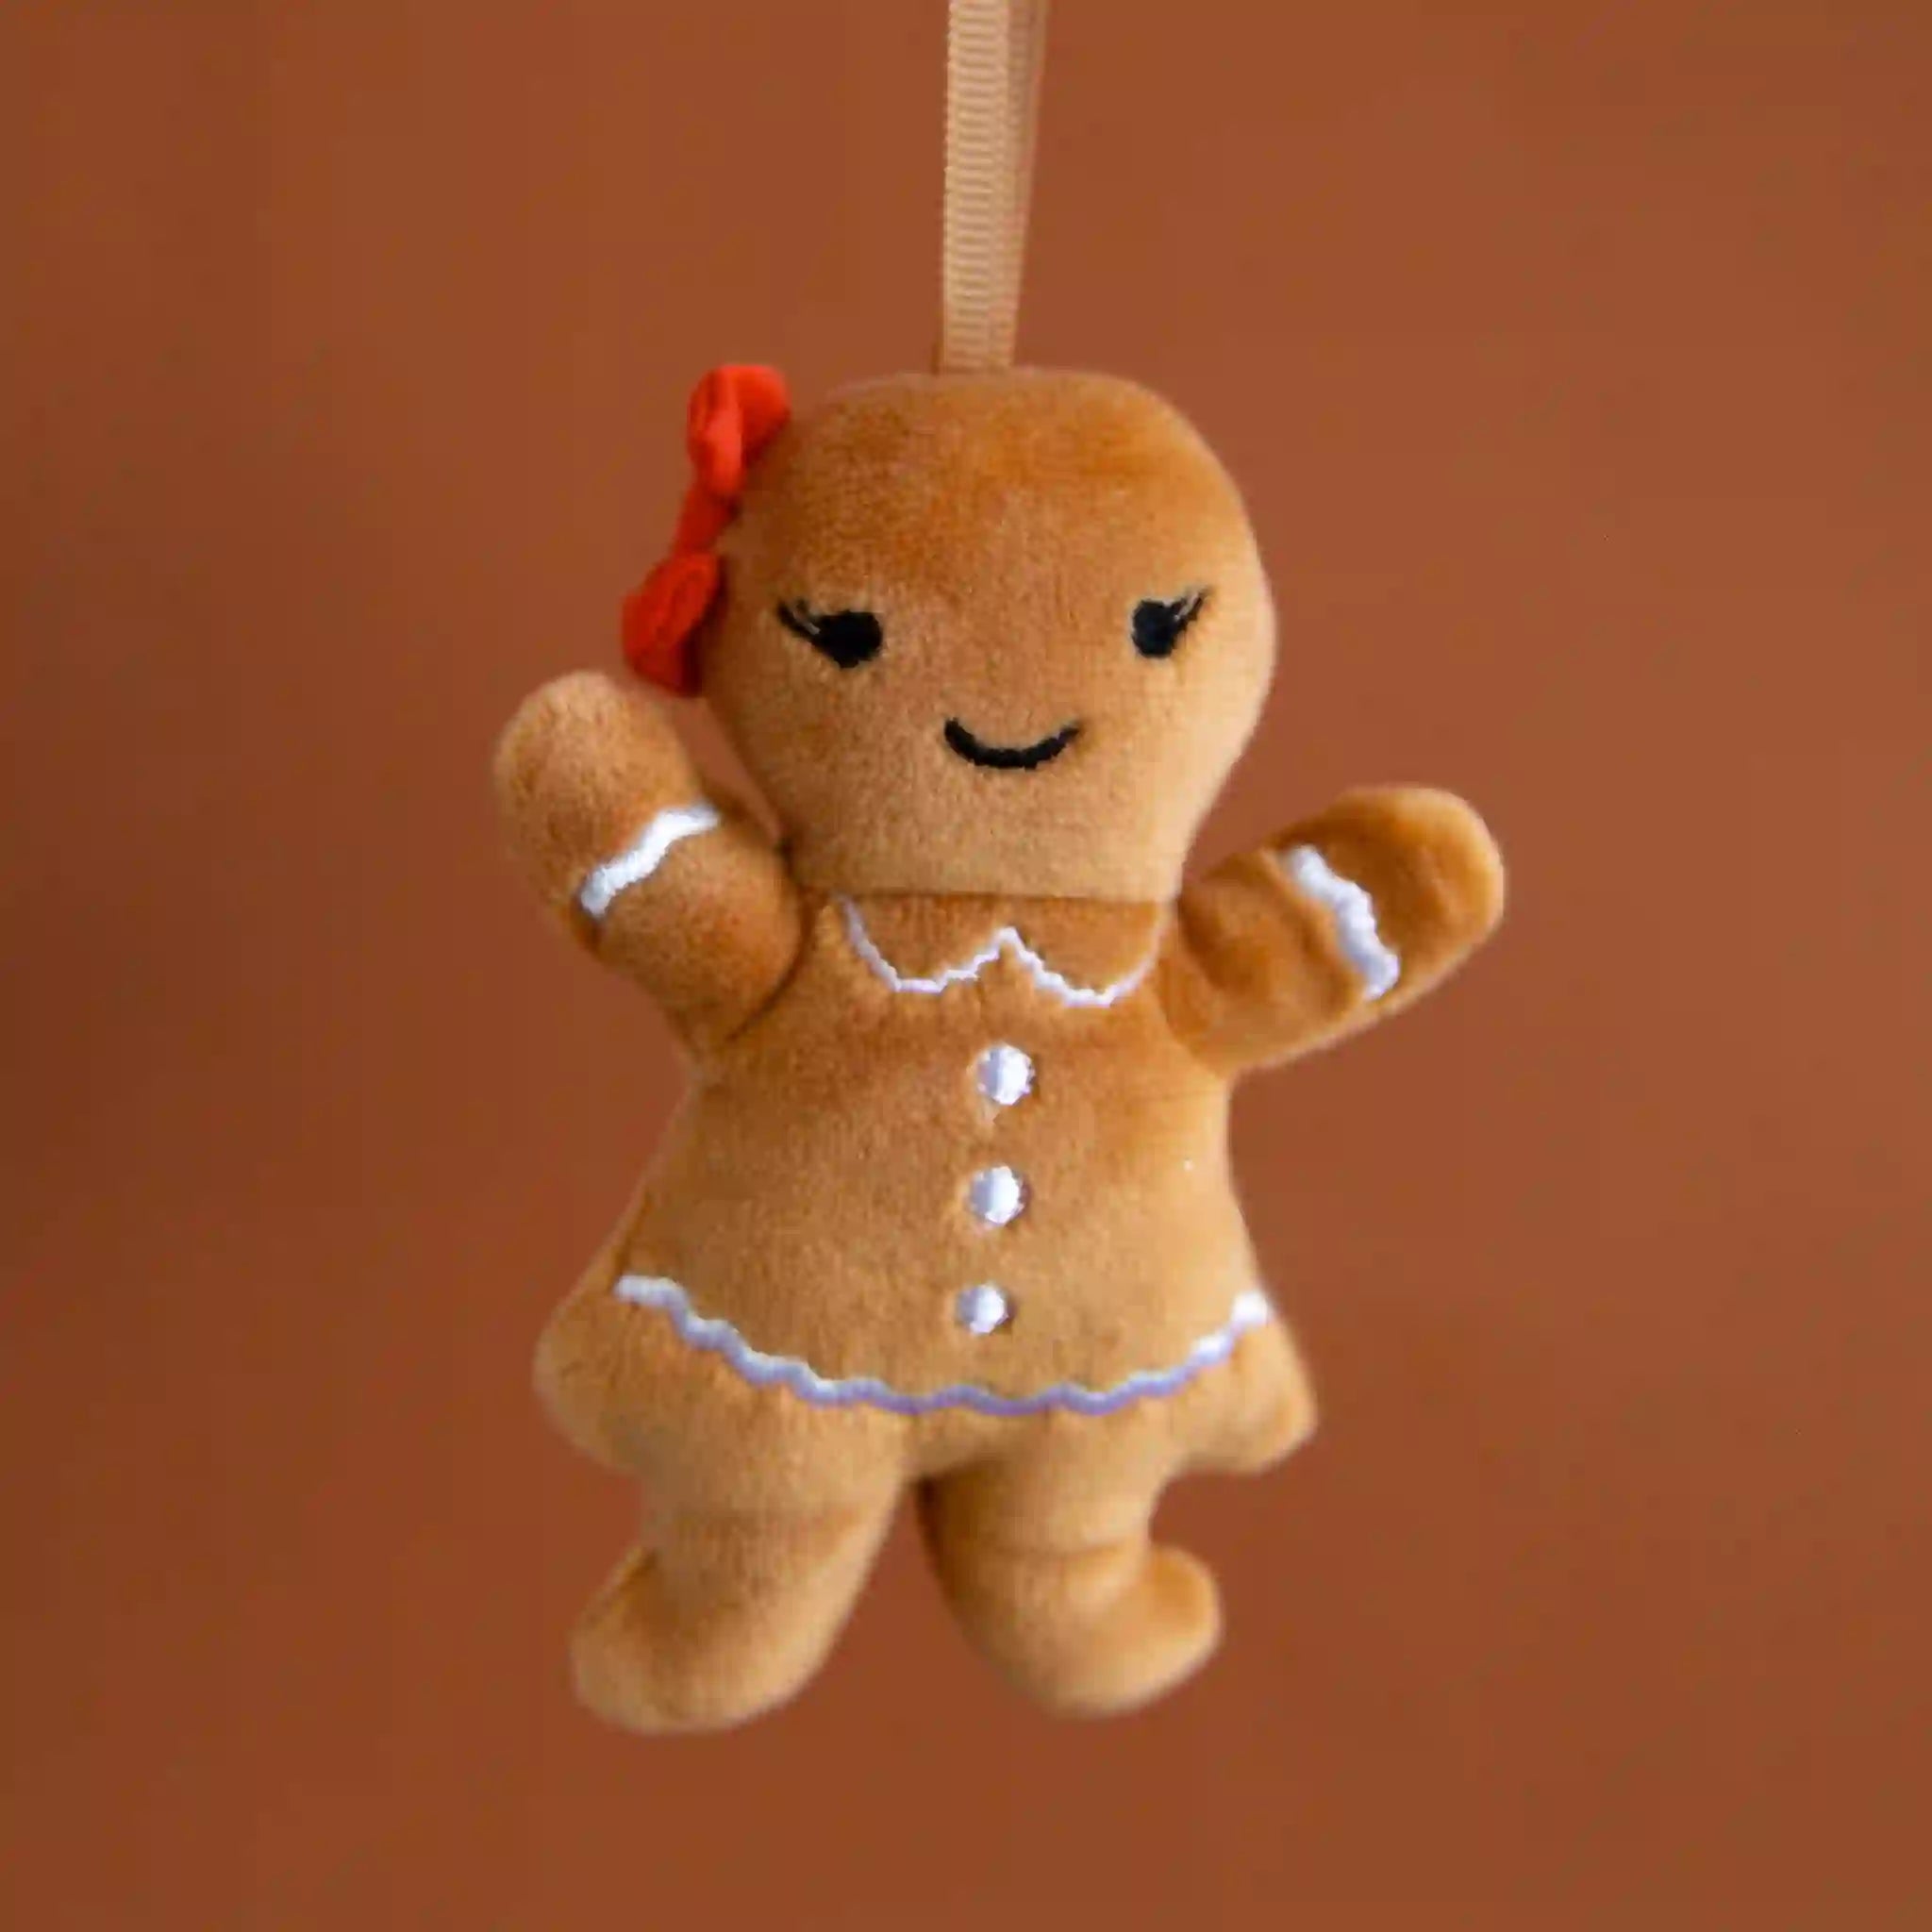 On a brown background is a brown gingerbread shaped stuffed toy with a smiling face, white detailing and a red bow on her head.